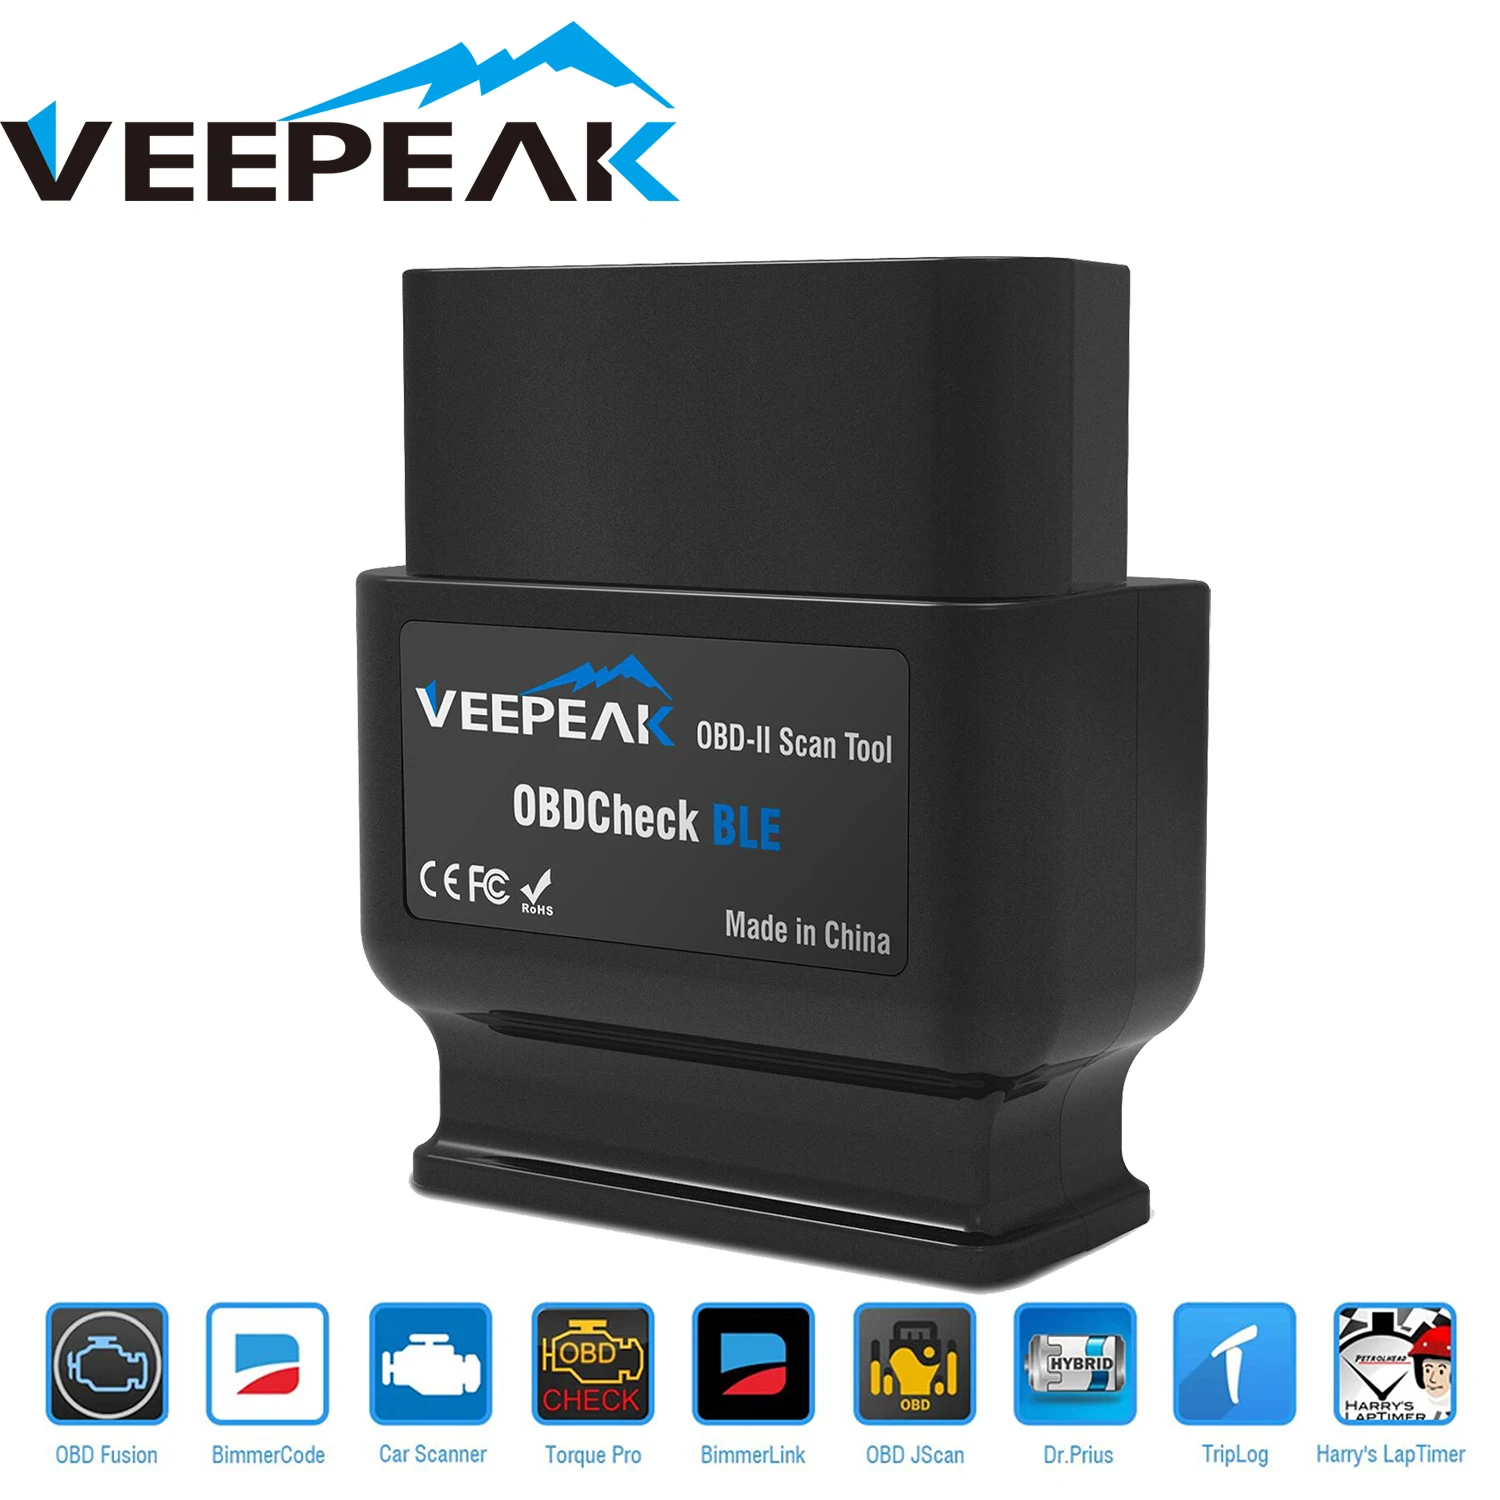 Veepeak OBDCheck BLE OBD2 Bluetooth Scanner Auto OBD II Diagnostic Scan Tool for iOS & Android, BT4.0 Car Check Engine veepeak obdcheck ble obd2 bluetooth scanner auto obd ii diagnostic scan tool for ios